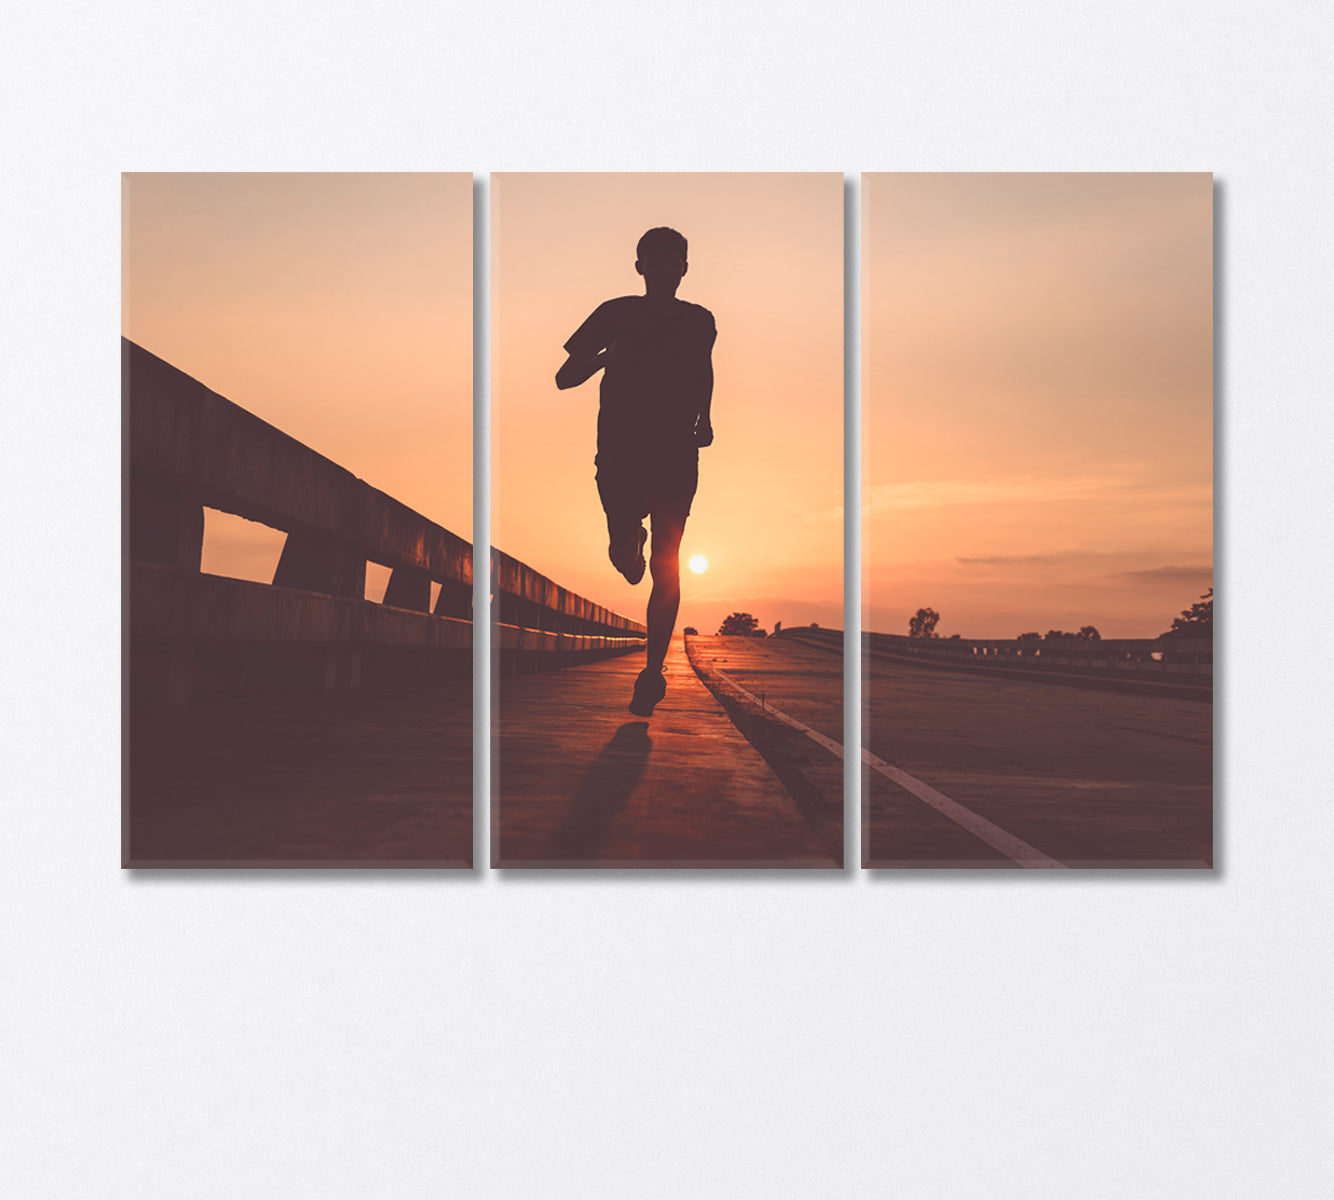 Running Athlete Outdoors in Sunset Canvas Print-Canvas Print-CetArt-3 Panels-36x24 inches-CetArt